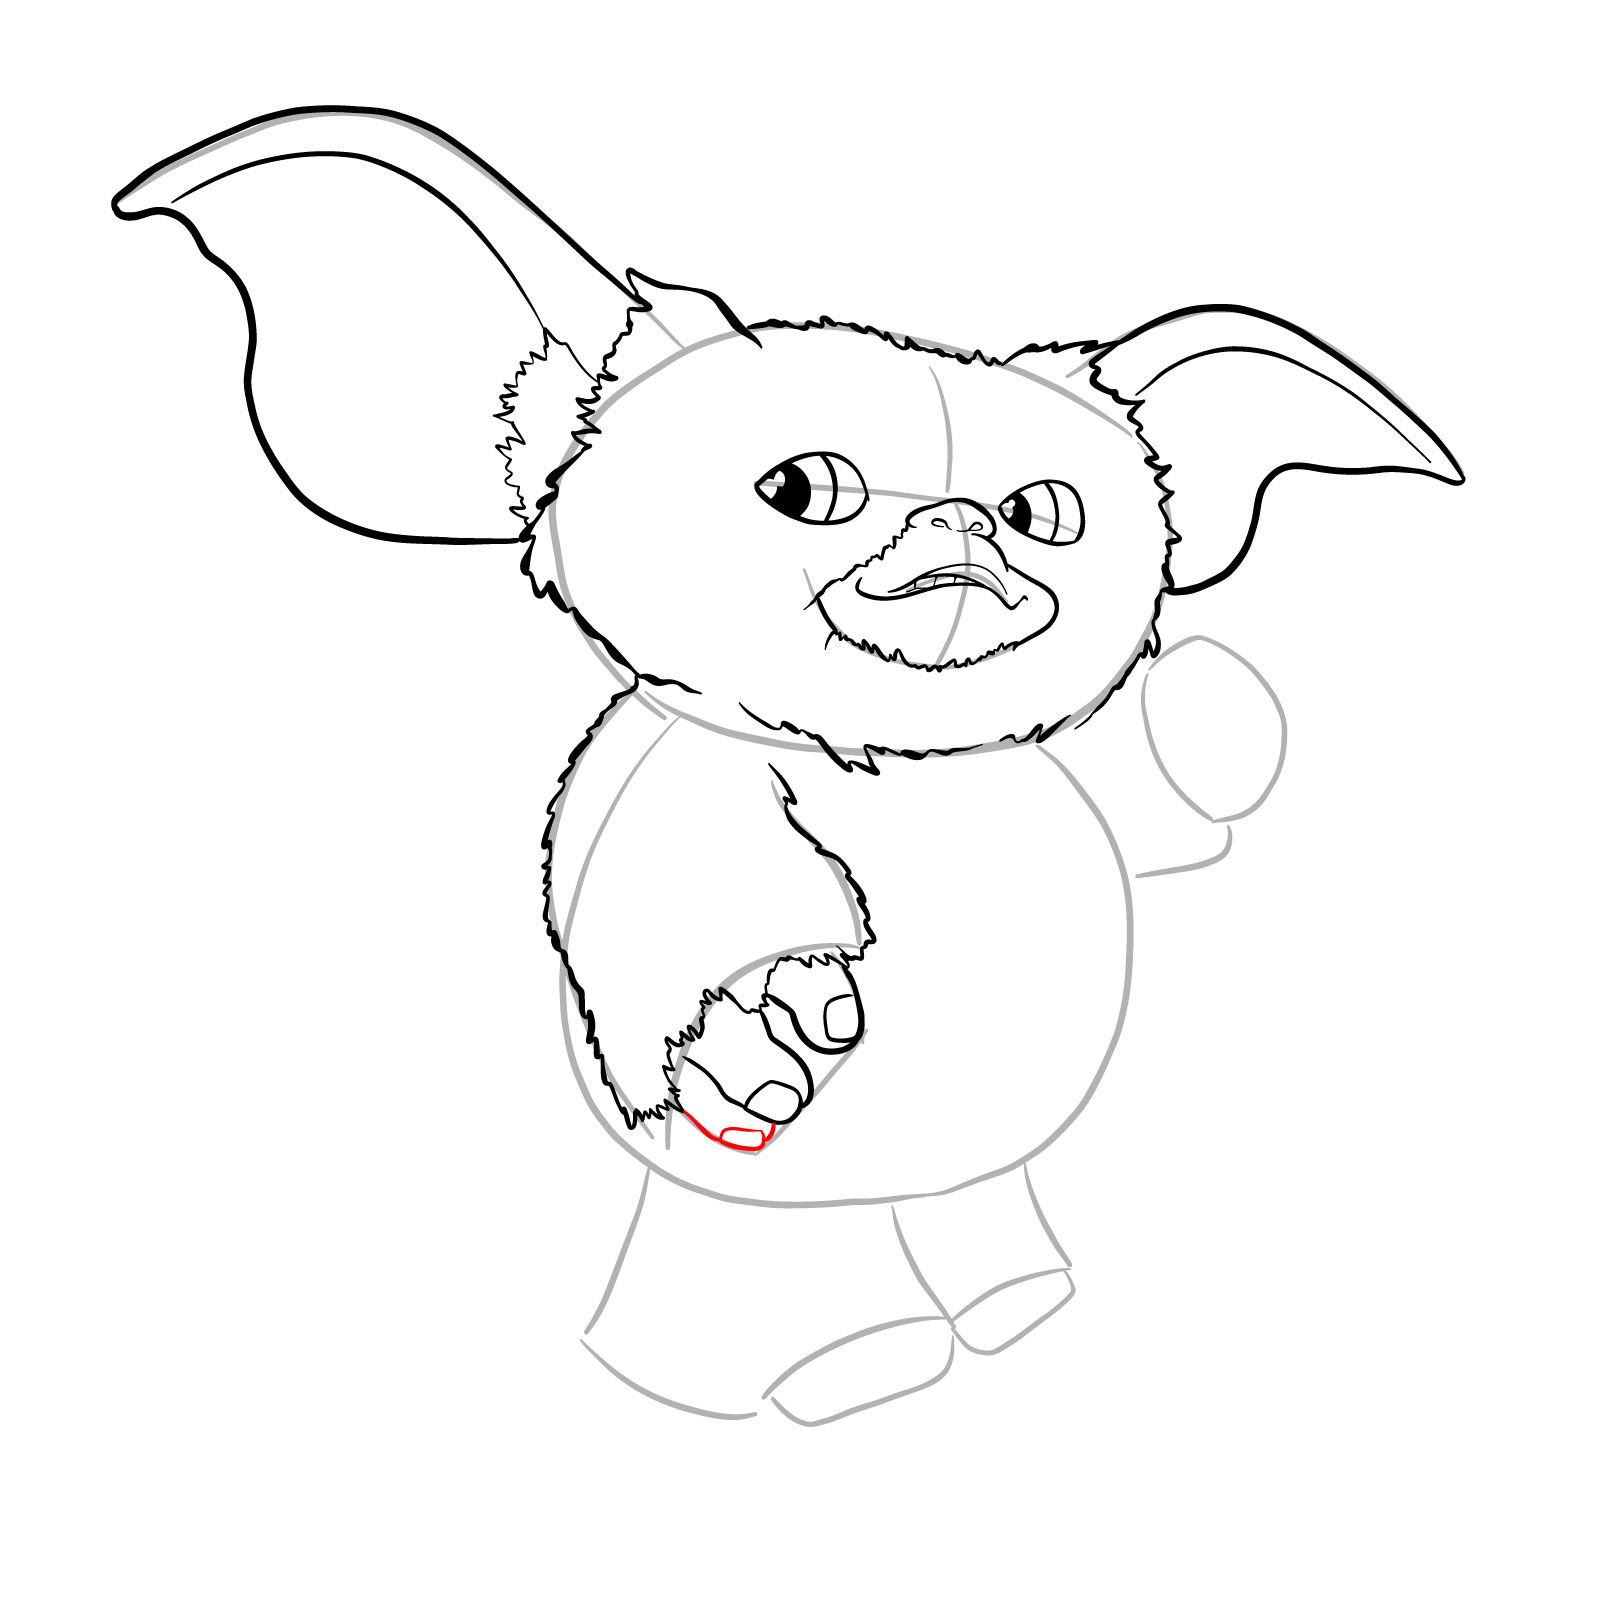 How to draw a Gremlin - step 19